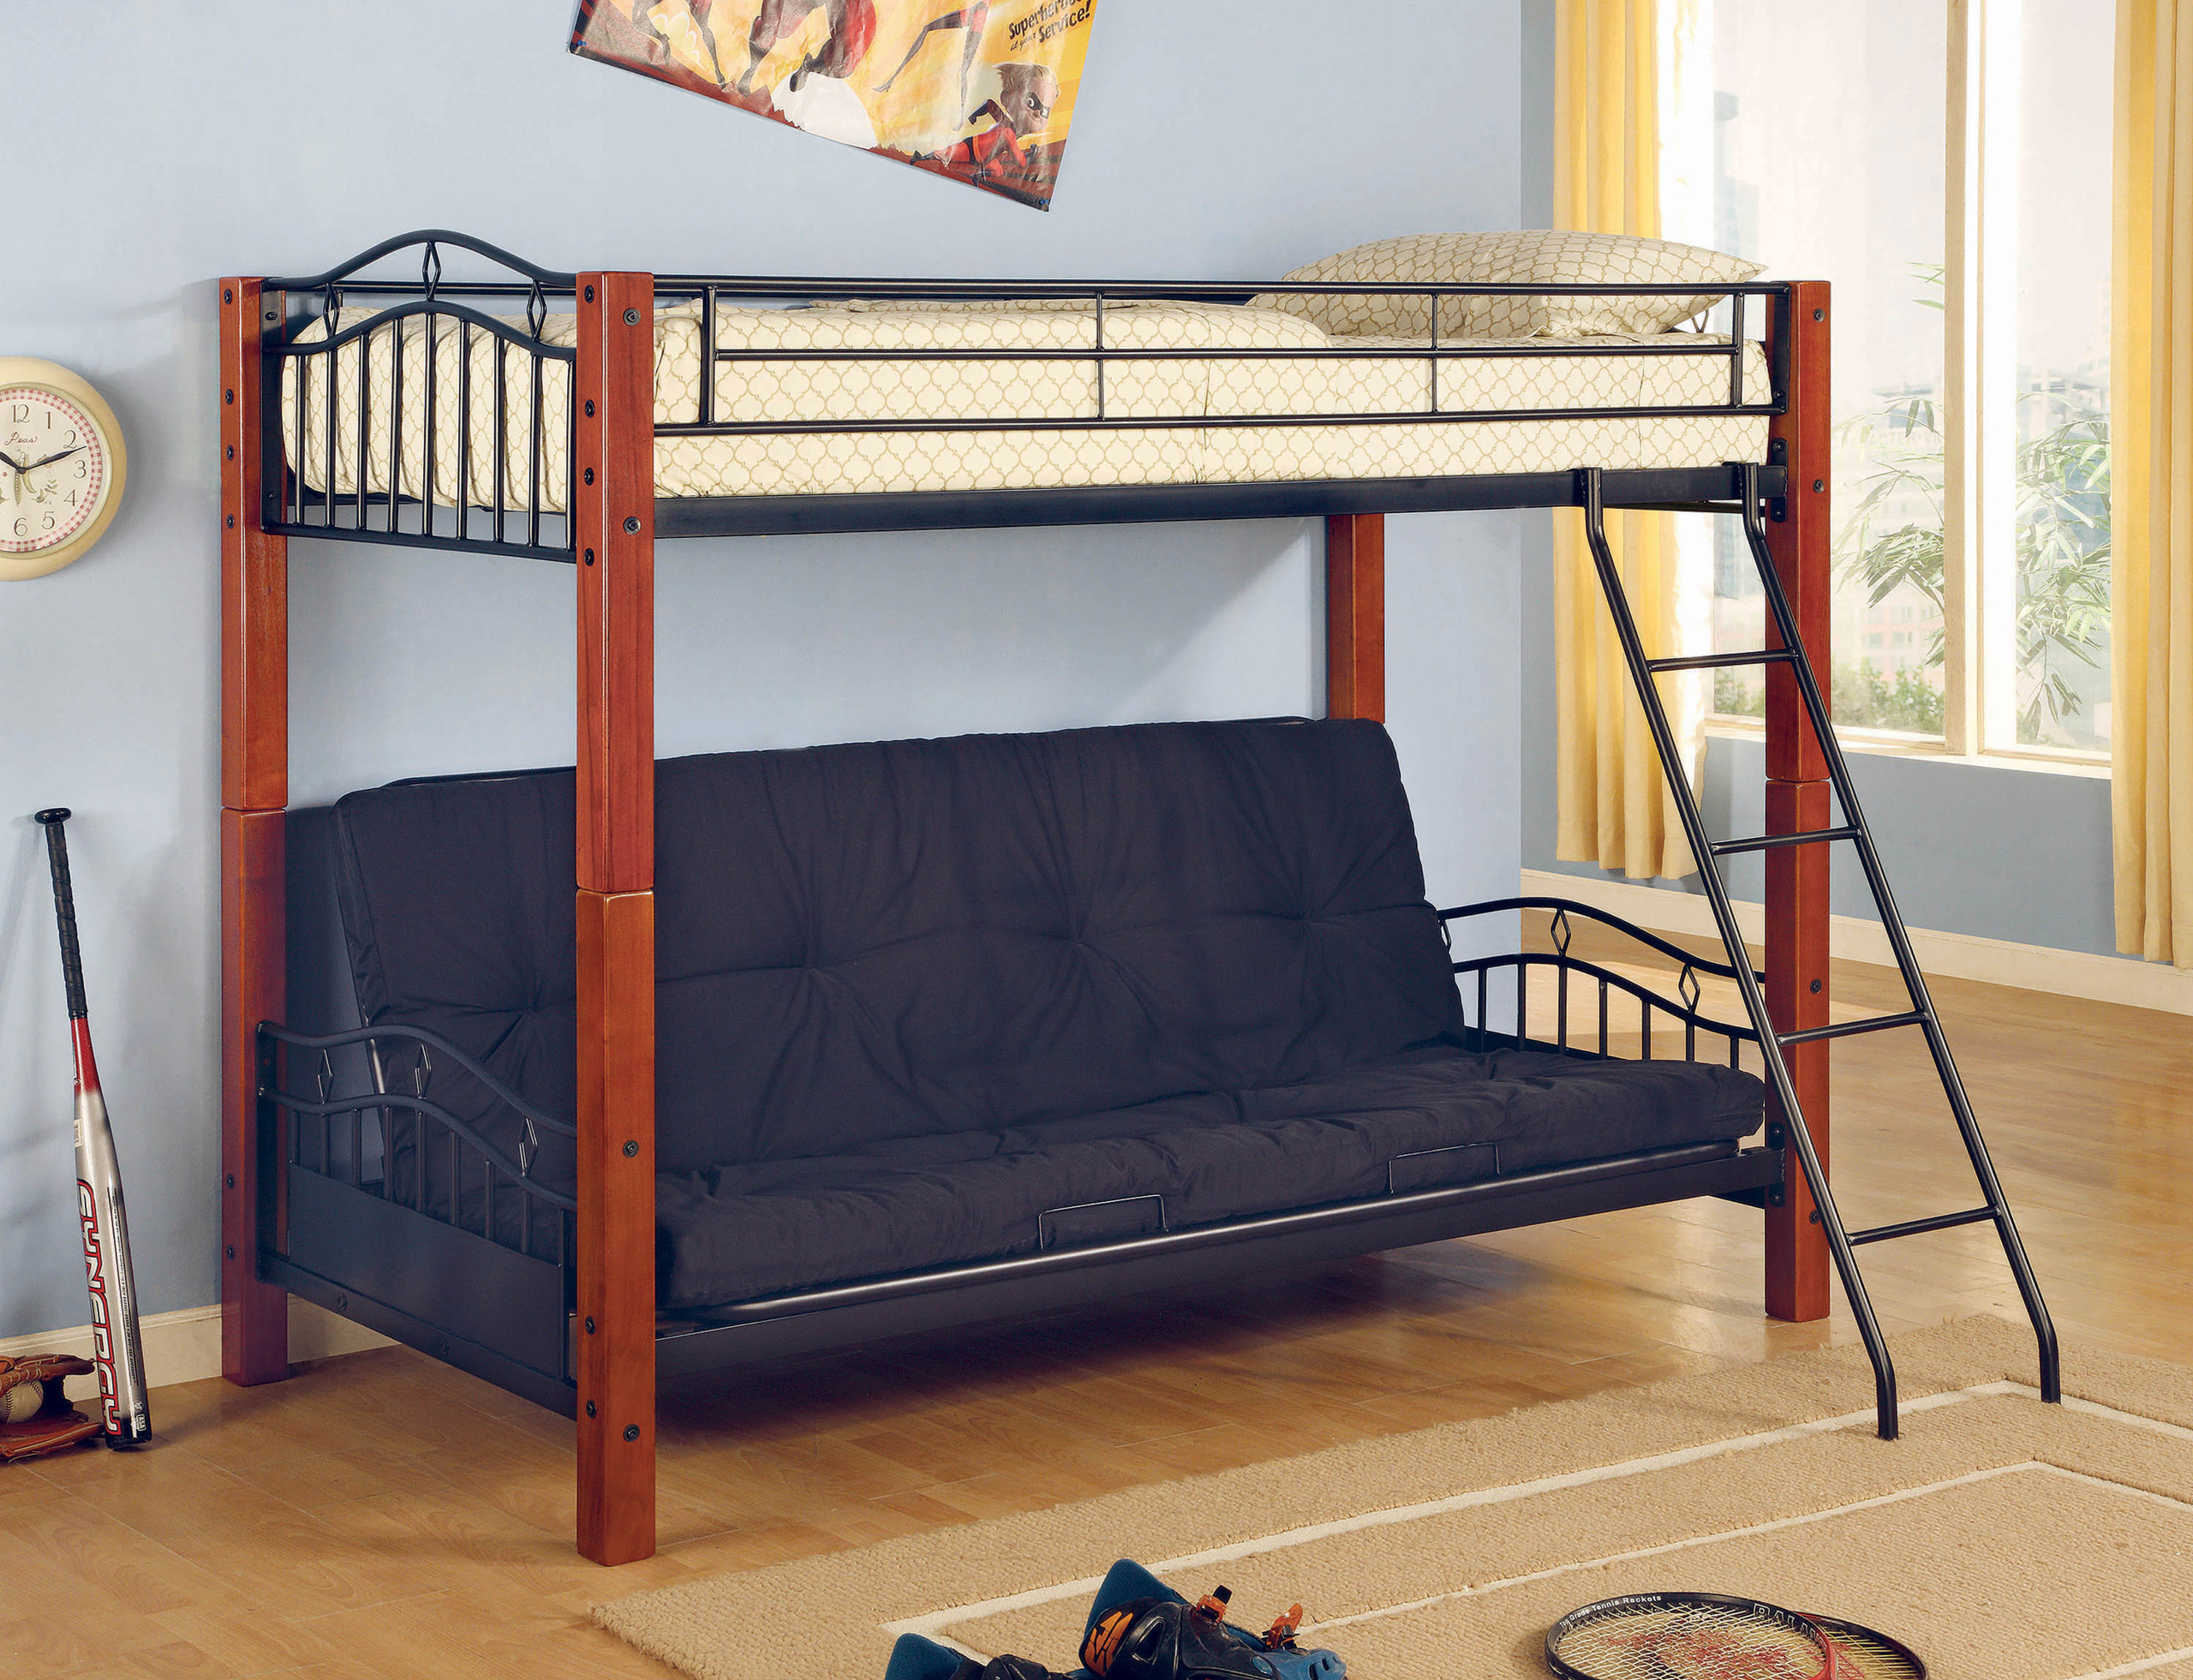 Full Over Futon Bunk Bed Visualhunt, A Futon Bunk Bed